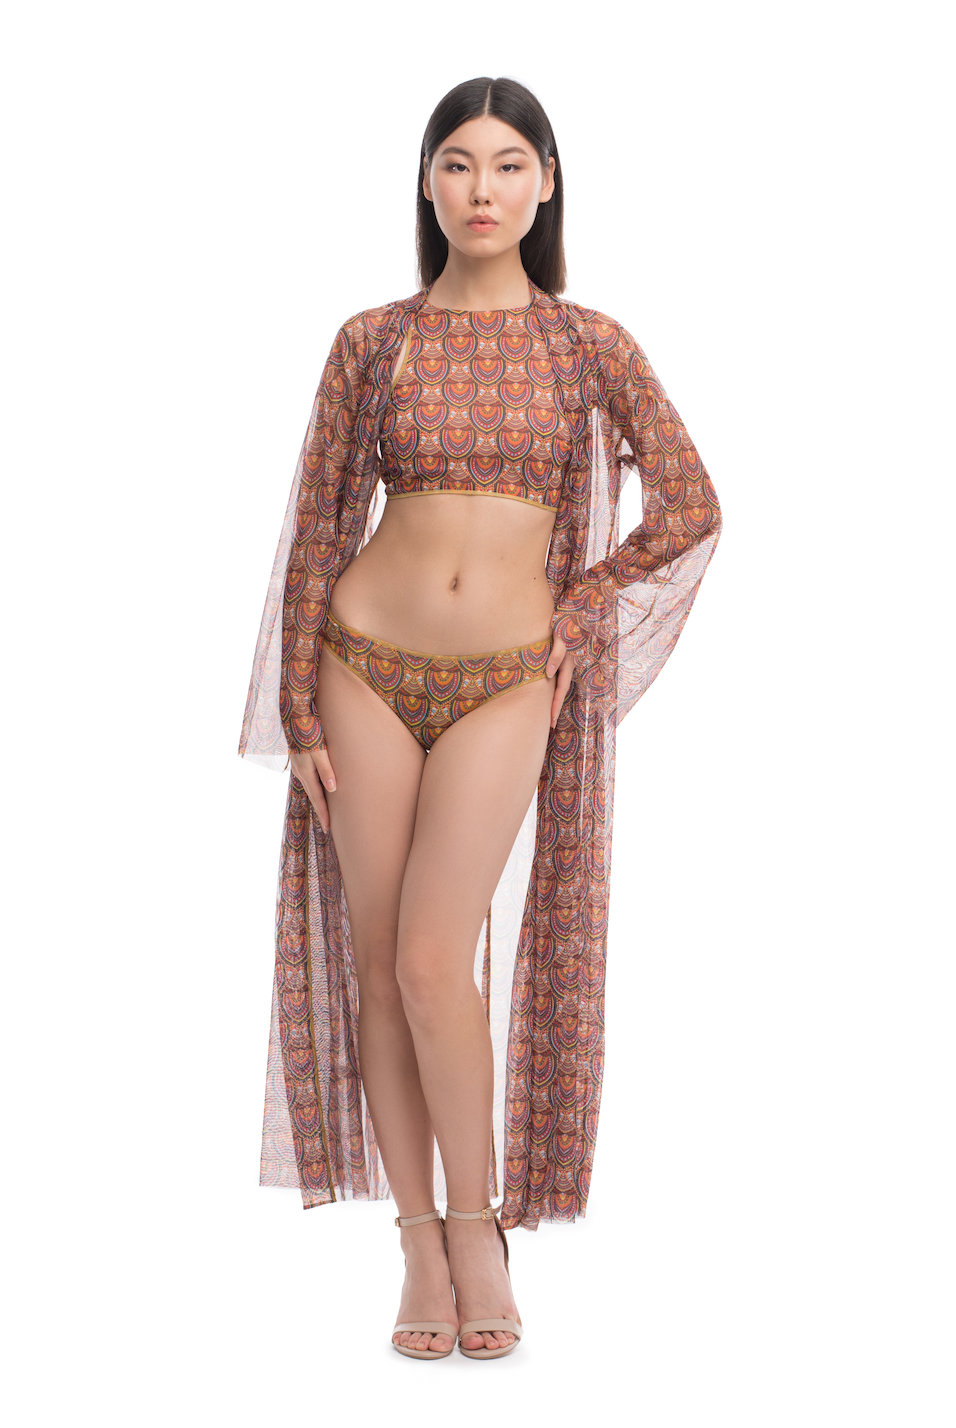 This document provides a concise overview of a sustainable Africa print beach robe, offering SPF 15 protection and tan-without-tan-lines technology. Ideal for individuals with visual impairments or low-bandwidth connections seeking stylish, sun-safe beachwear options